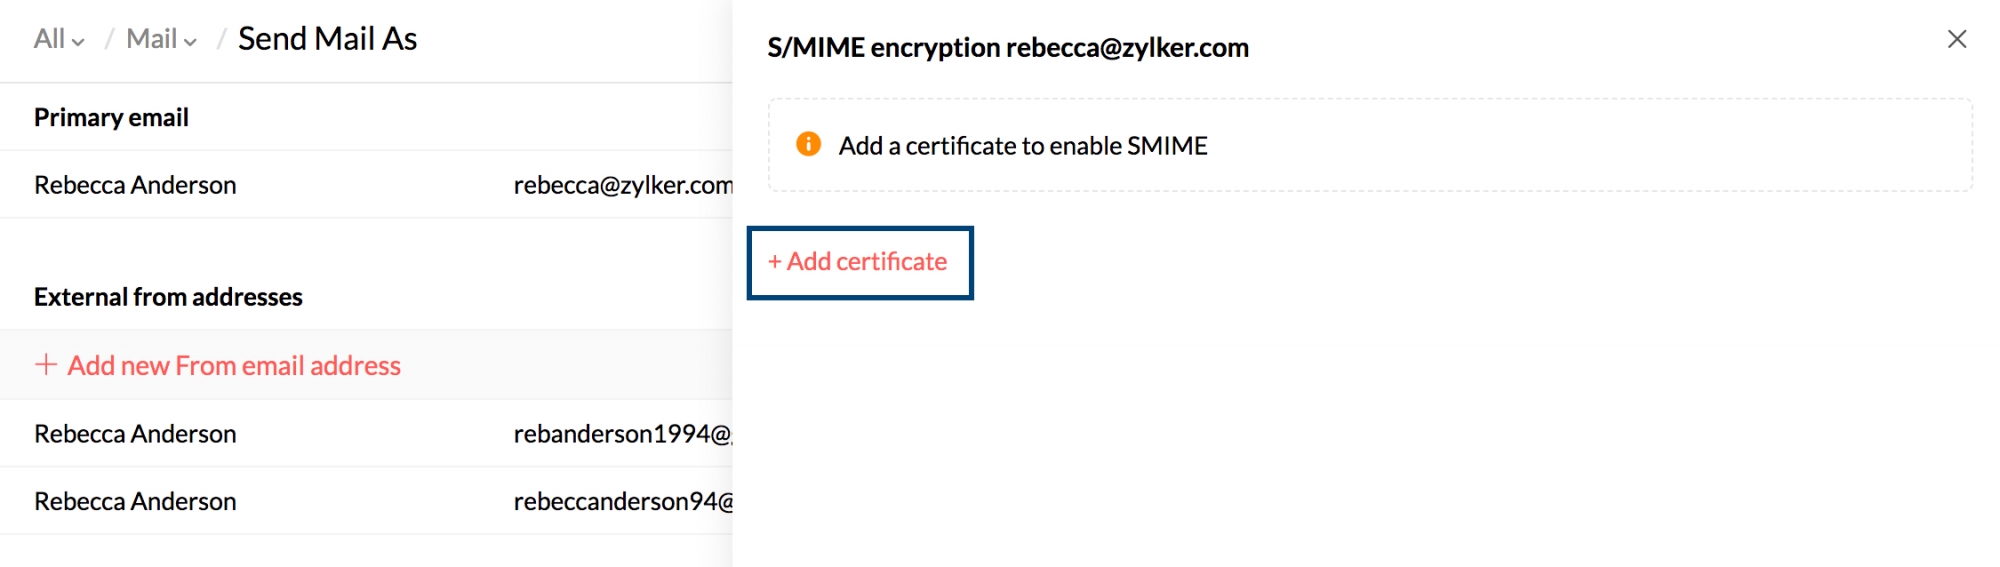 adding S/MIME certificate